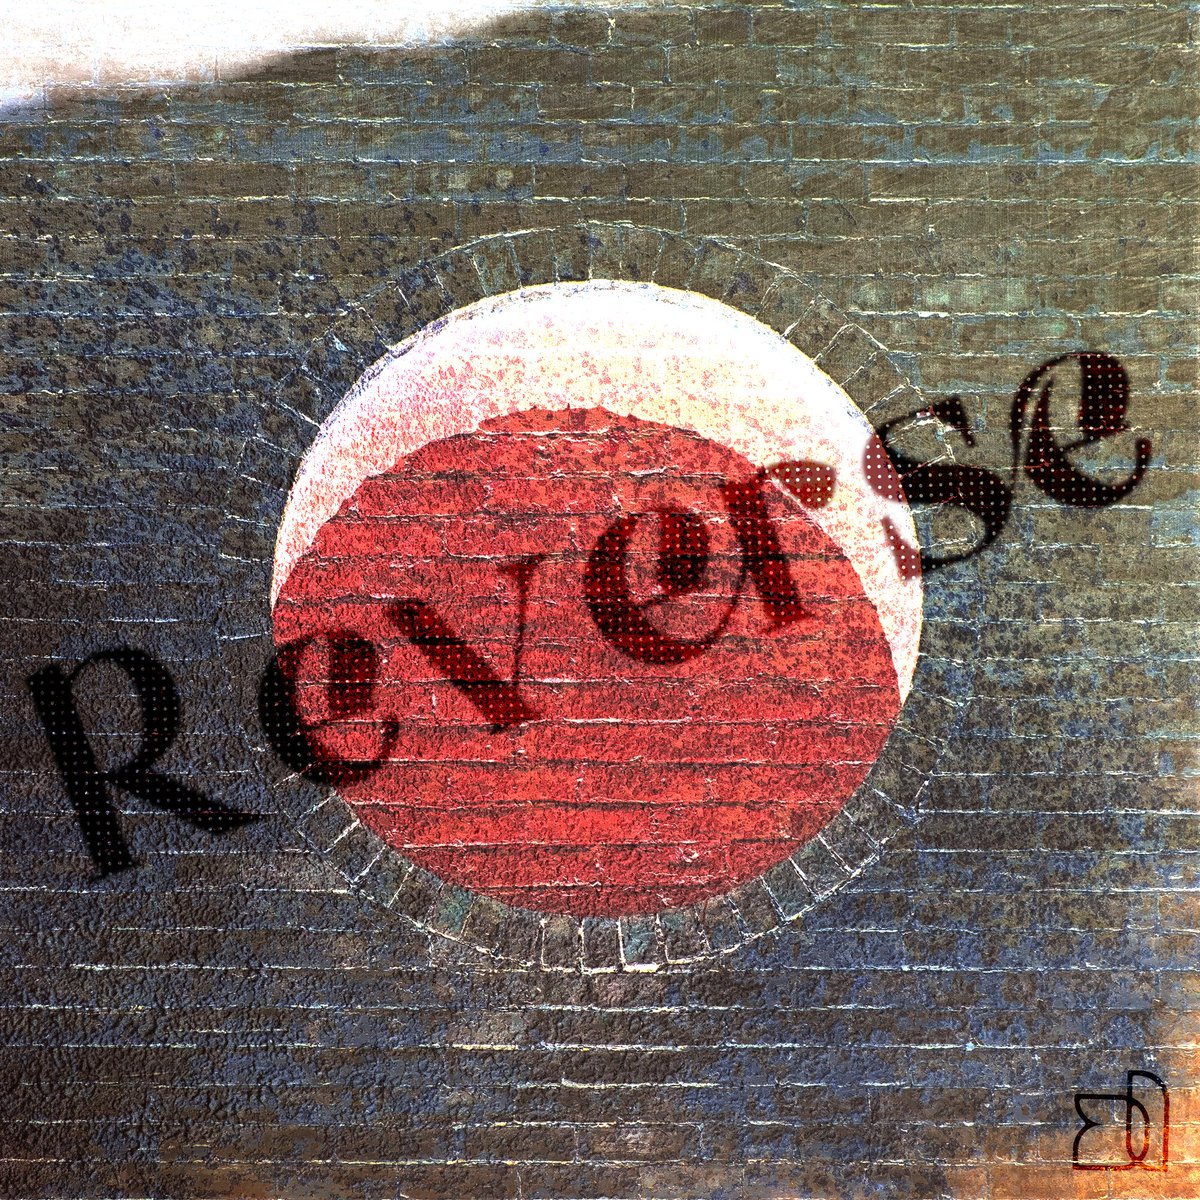 Reverse - photoshop

Still experimenting and to see on what works and what doesn't but hey makes things interesting.

#Design, #Streetstyle, #typography, #Typographic,#Streetdesign,#elementsofart, #experimental,#explorationart,#graphicdesign,#designer,#texturedart